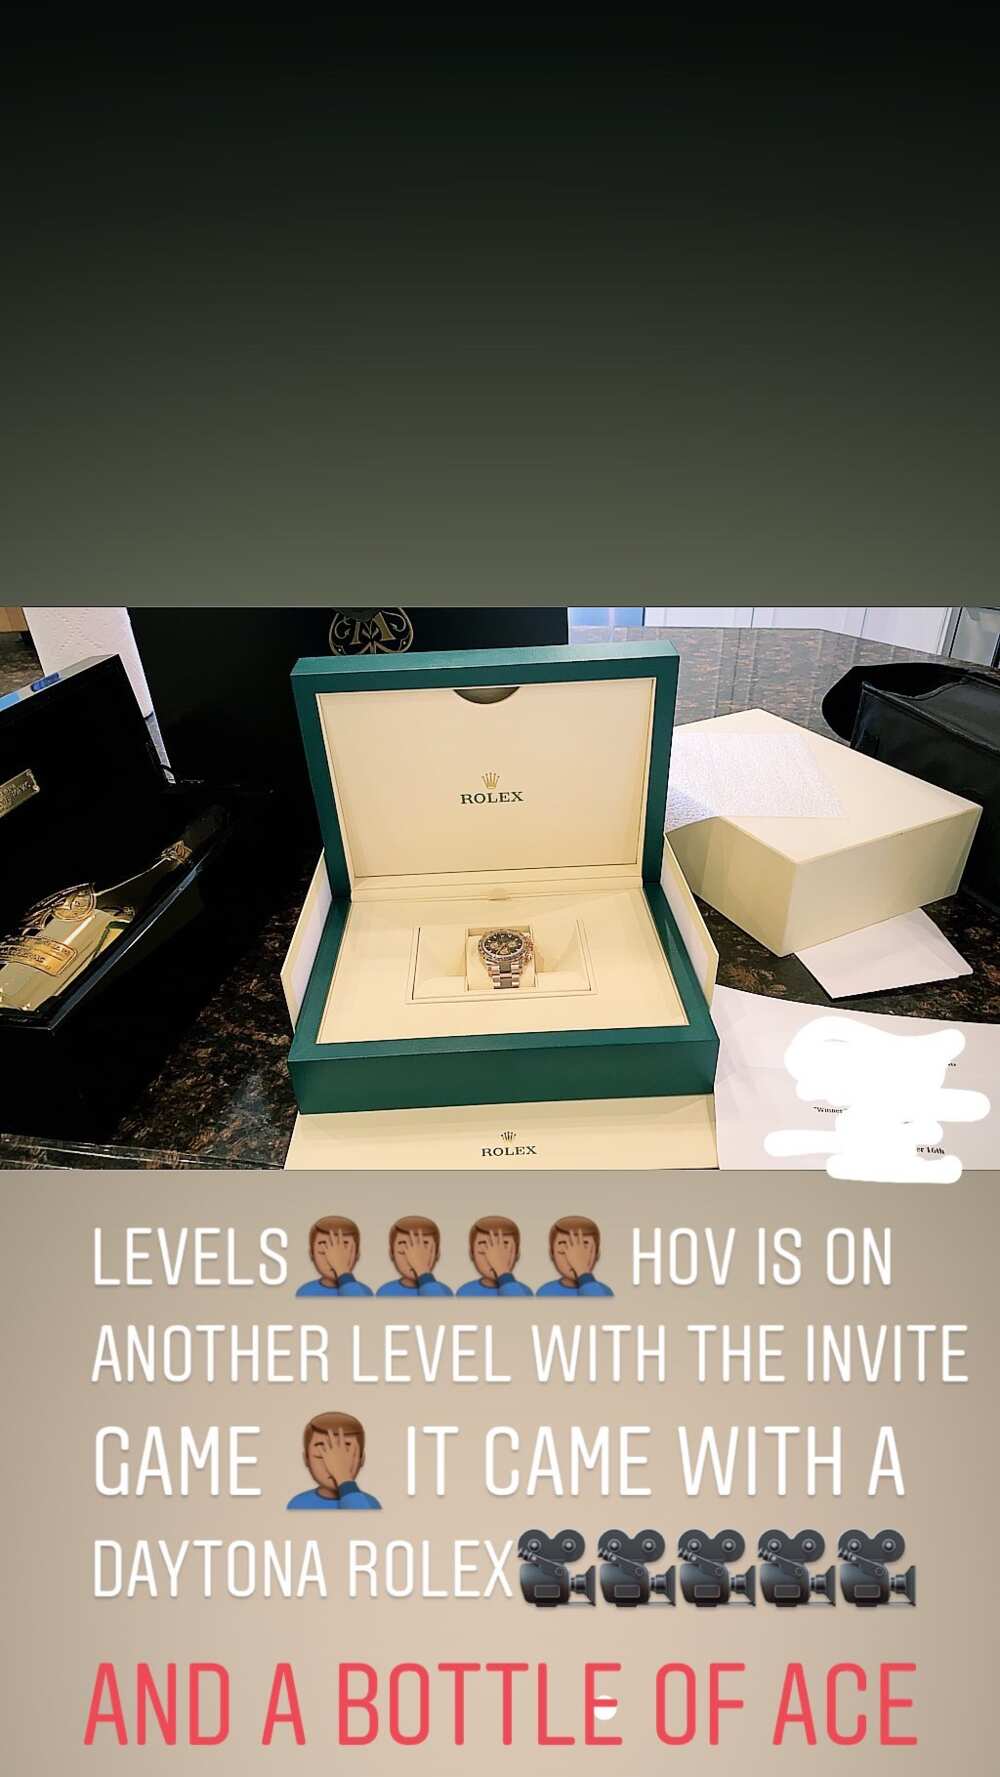 JAY-Z sends Meek Mill and Swizz Beatz Rolex watches as VIP pass to his event